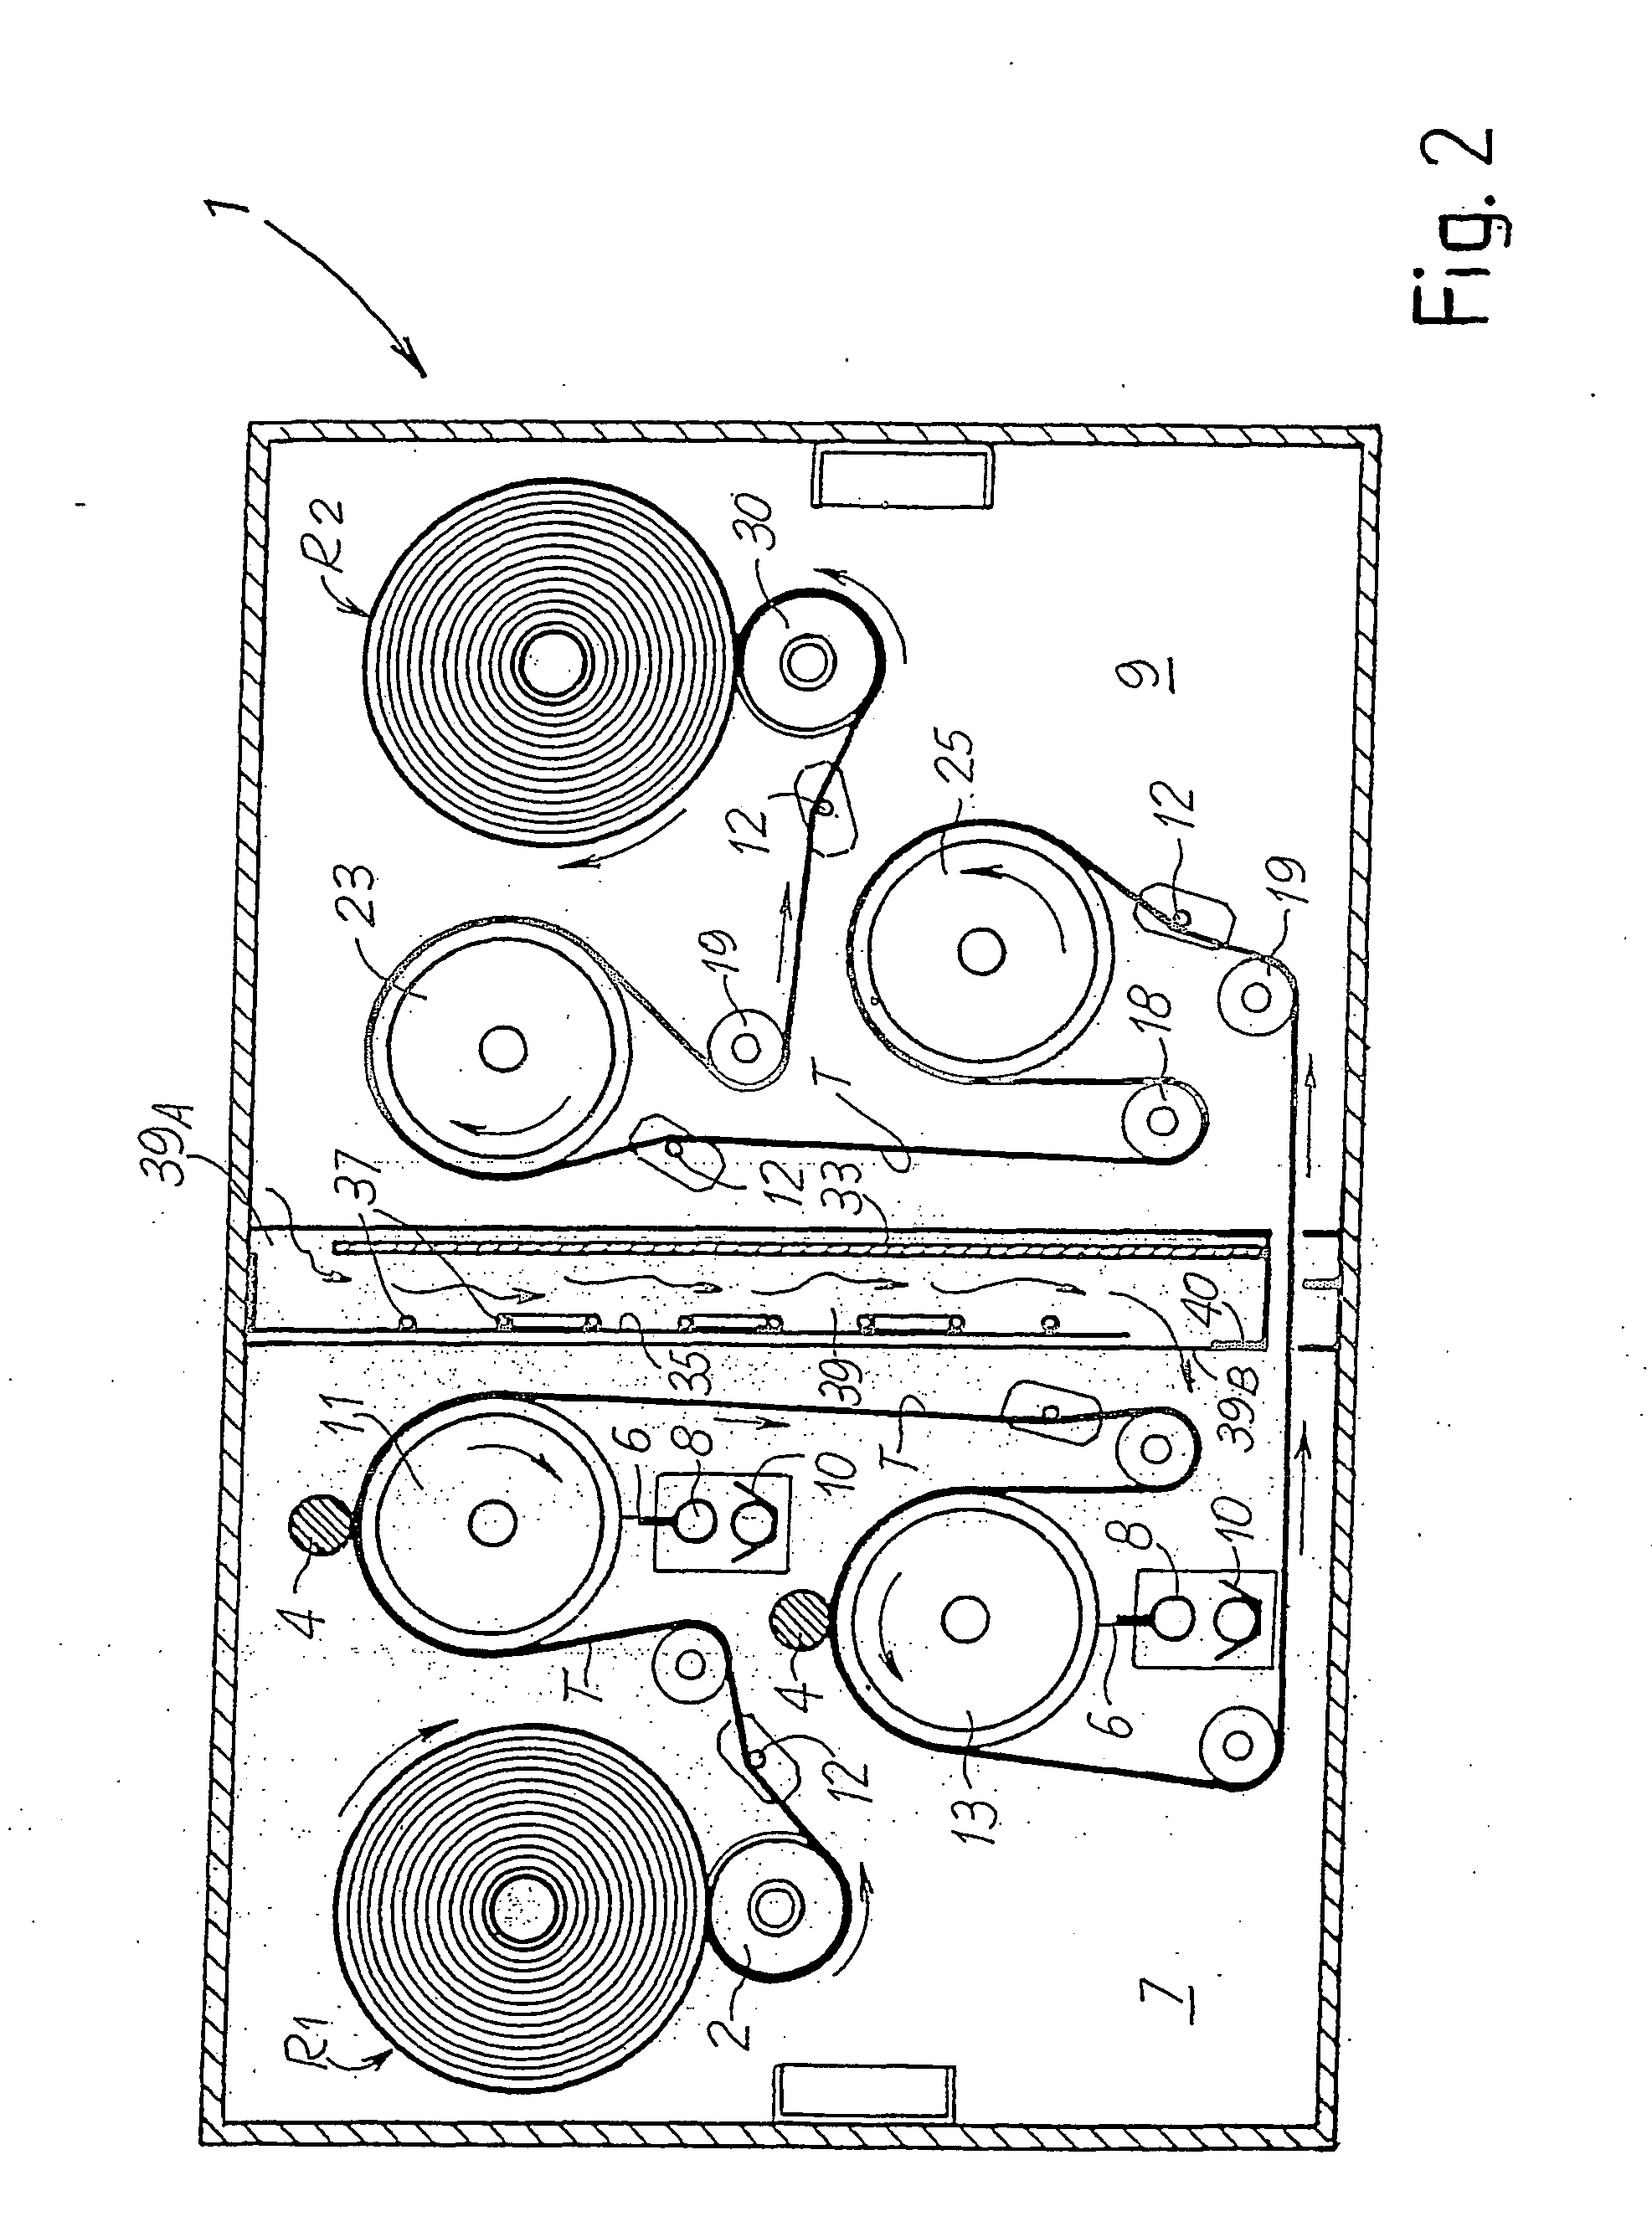 Method and machine for treating textile materials by ammonia or other liquids